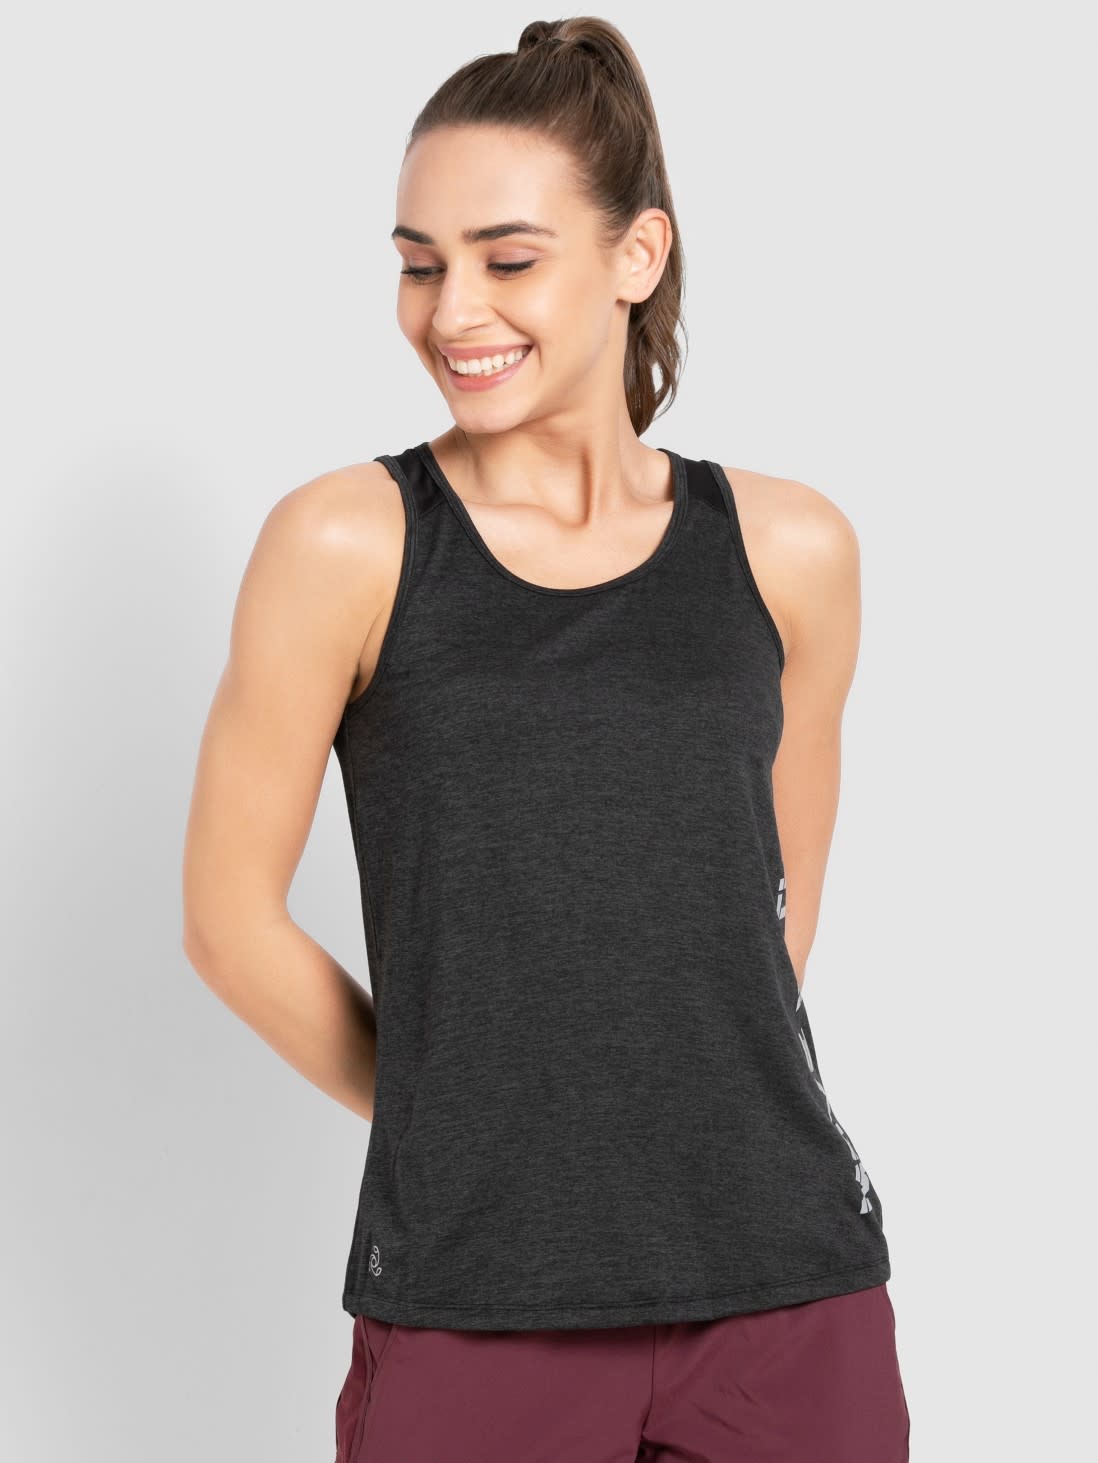 Women's A line Sleeveless Tunic Tank Top Clothing Womens Clothing Tops & Tees Tanks Made in USA 